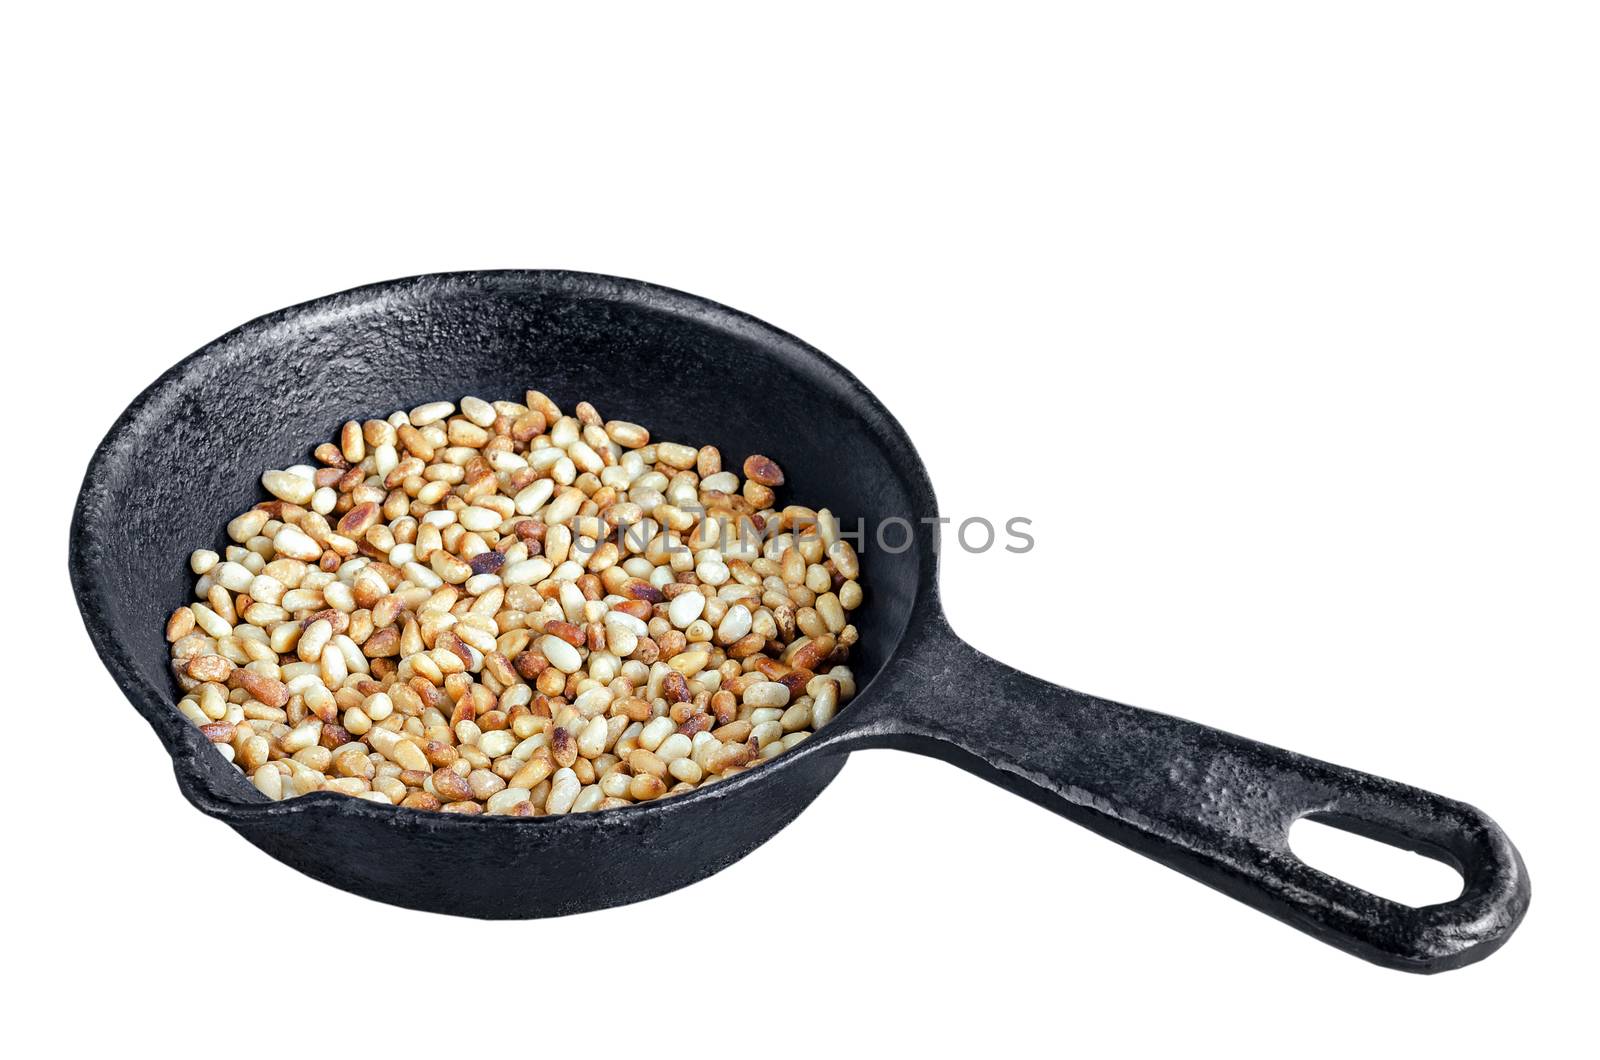 Toasted pine nuts in a frying pan, white background by Gaina